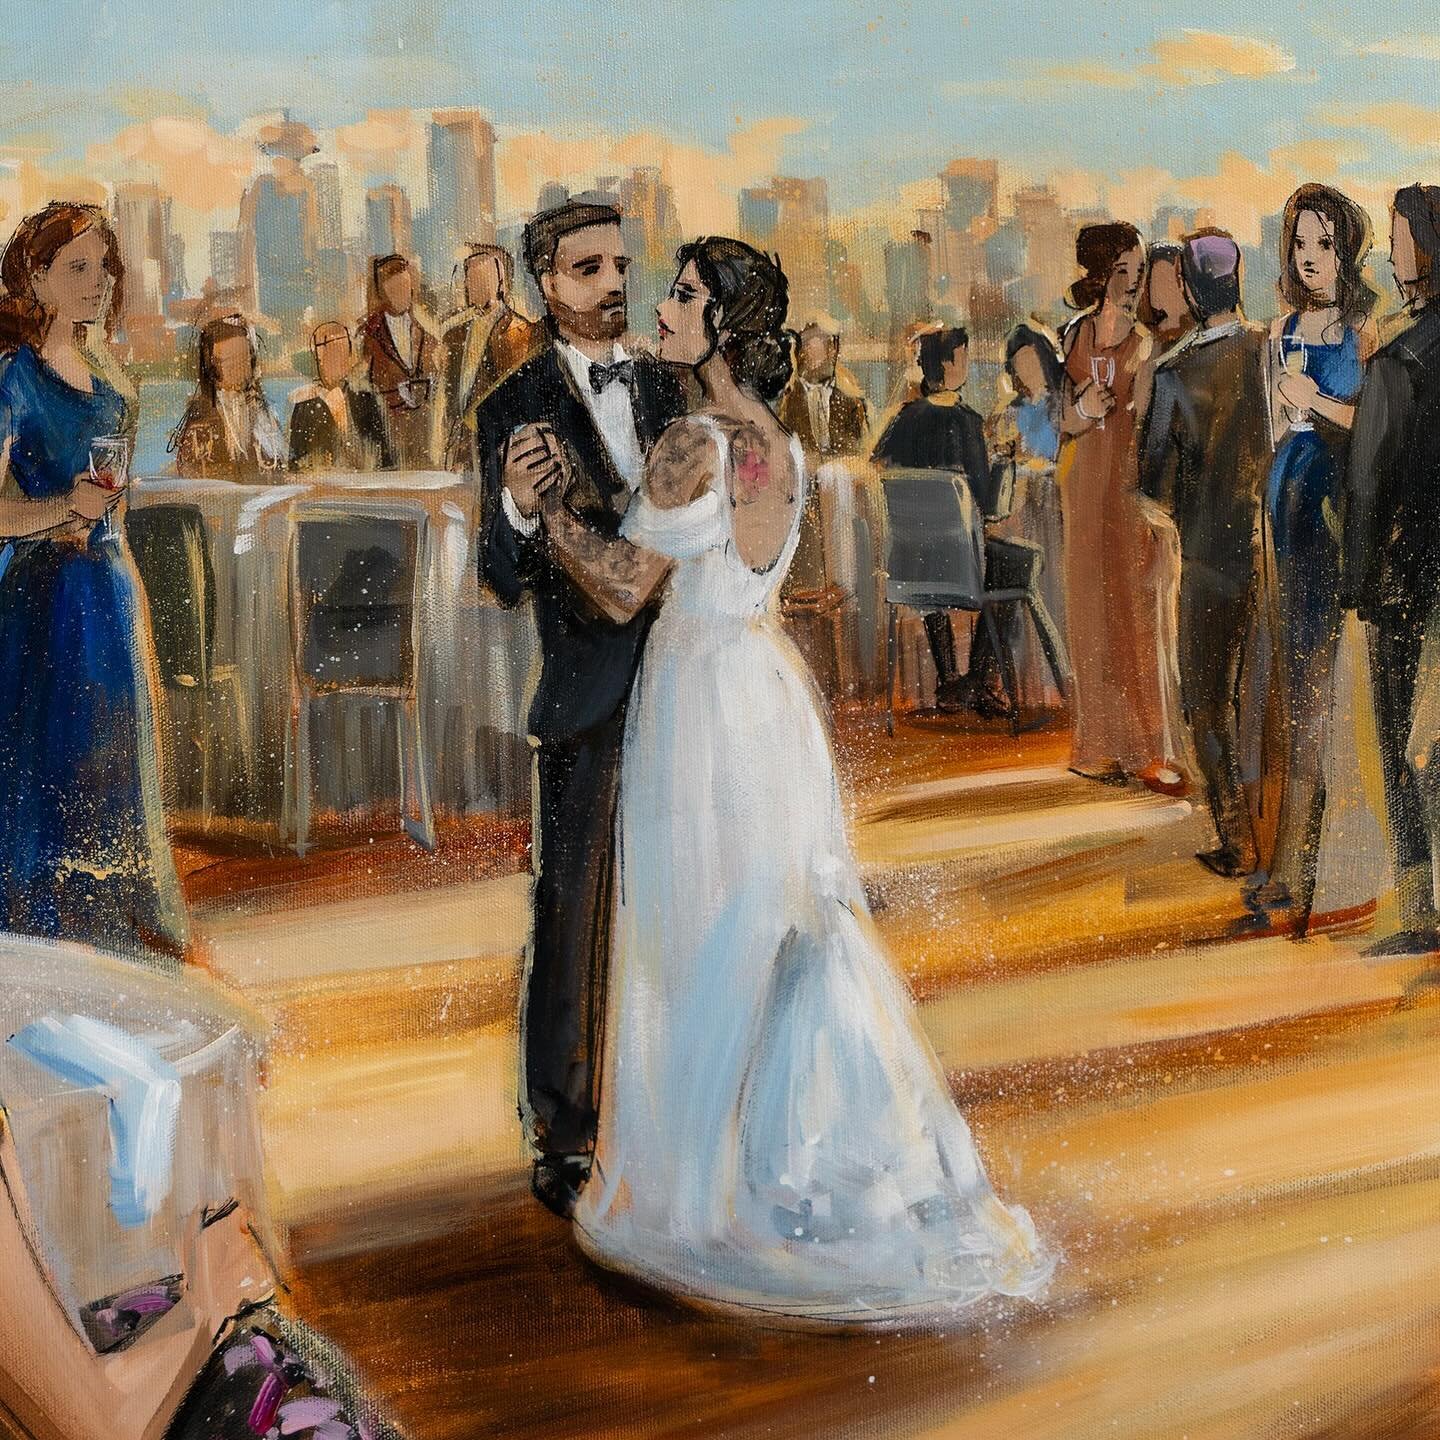 Here&rsquo;s a closer peek at the finished live painting from the enchanting wedding at the Polygon venue. The city skyline provided a stunning backdrop! 🎨🌆#WeddingMemories #UrbanArtistry #LiveEventPainting